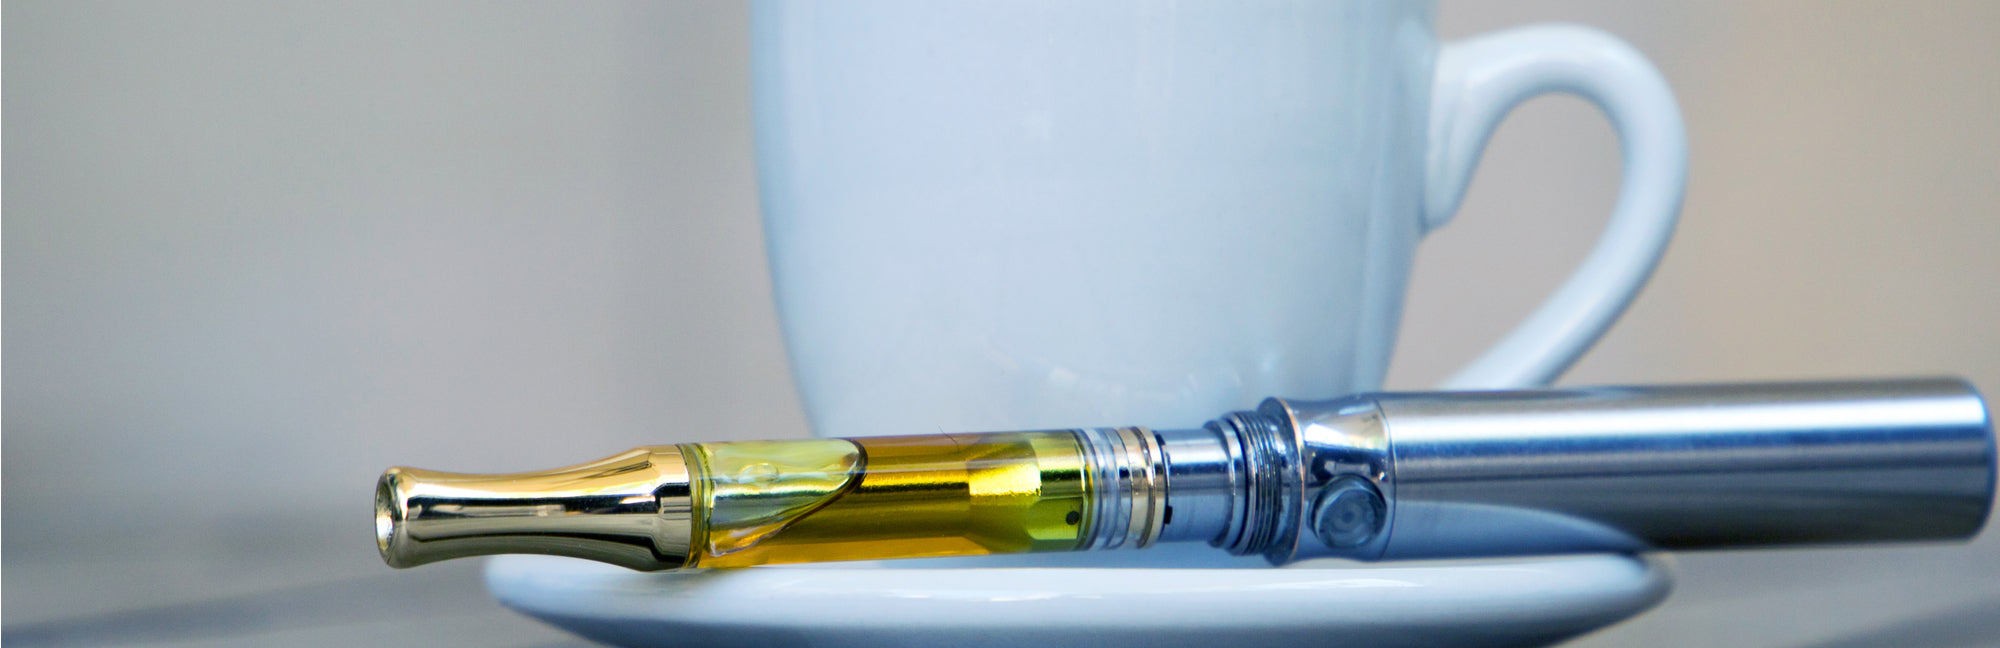 How to Use a Wax Pen Vape for Dabbing Concentrates